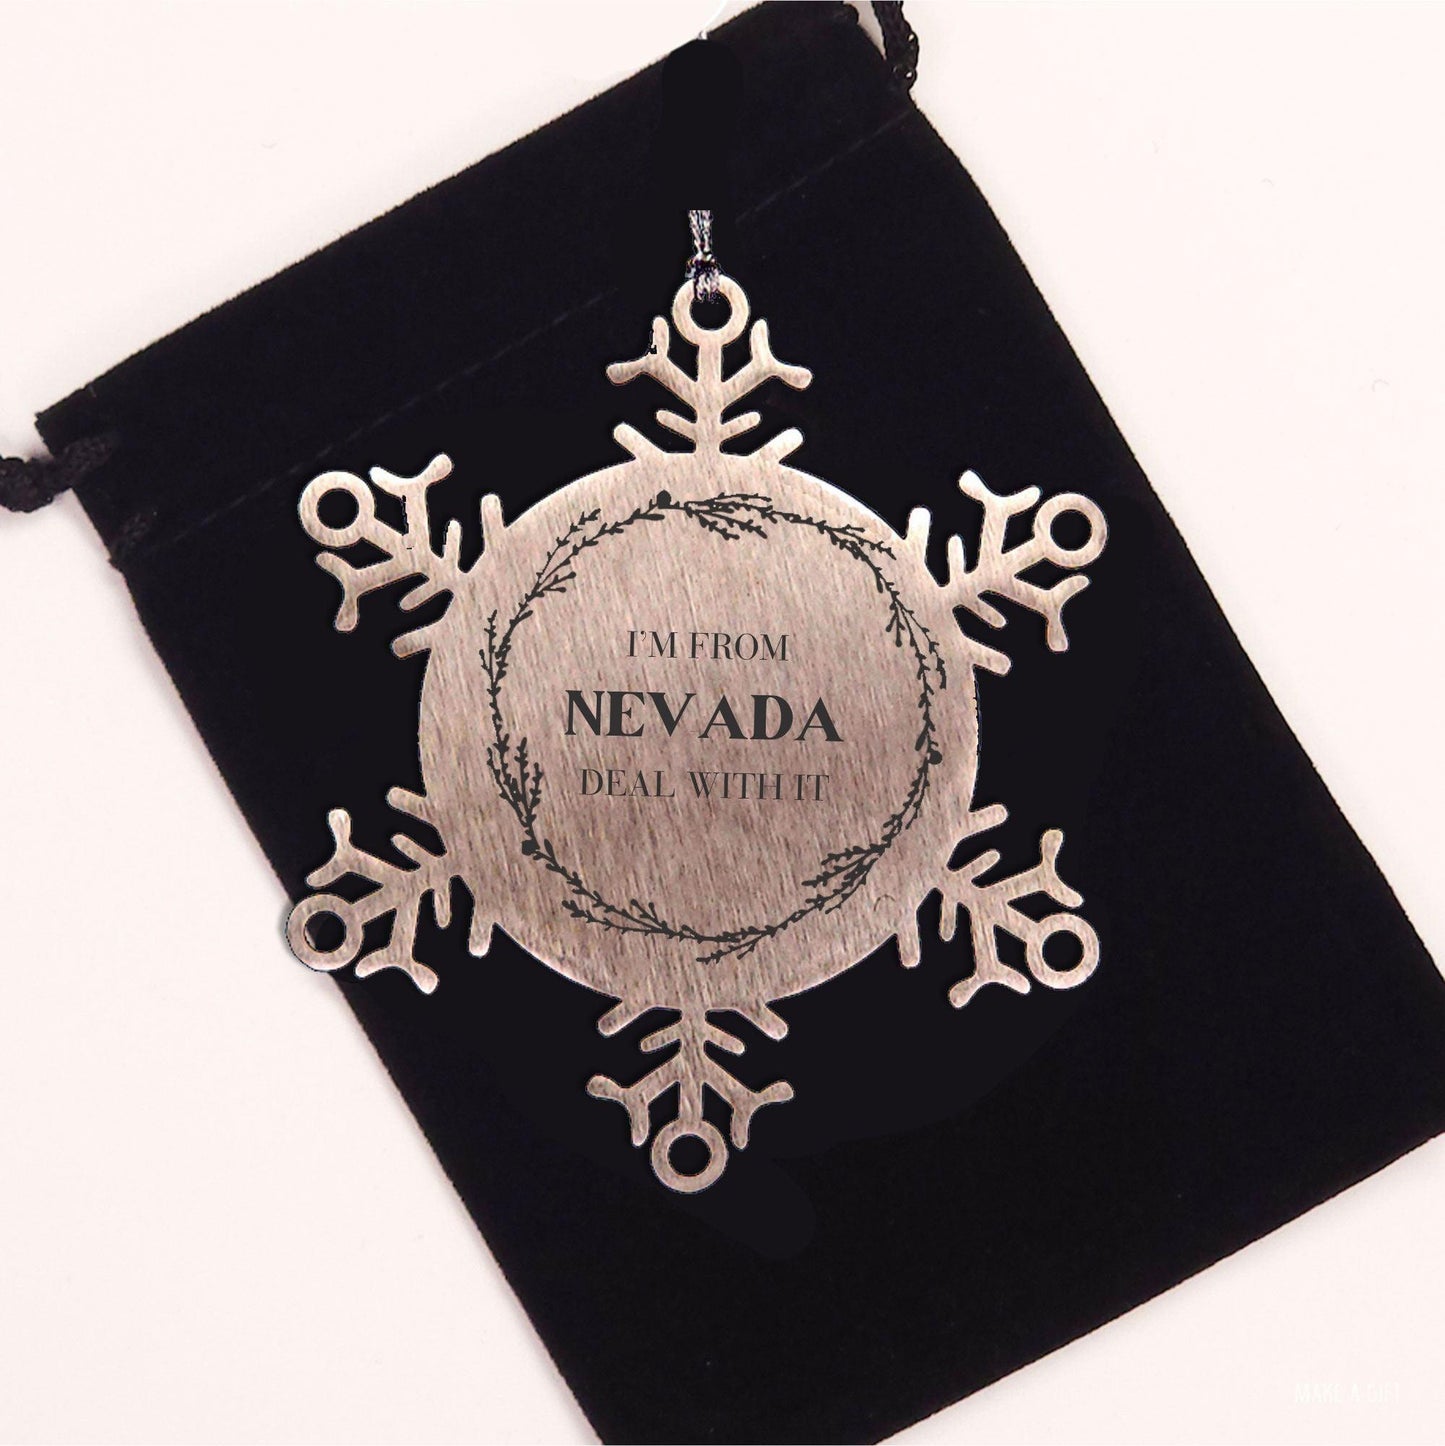 I'm from Nevada, Deal with it, Proud Nevada State Ornament Gifts, Nevada Snowflake Ornament Gift Idea, Christmas Gifts for Nevada People, Coworkers, Colleague - Mallard Moon Gift Shop